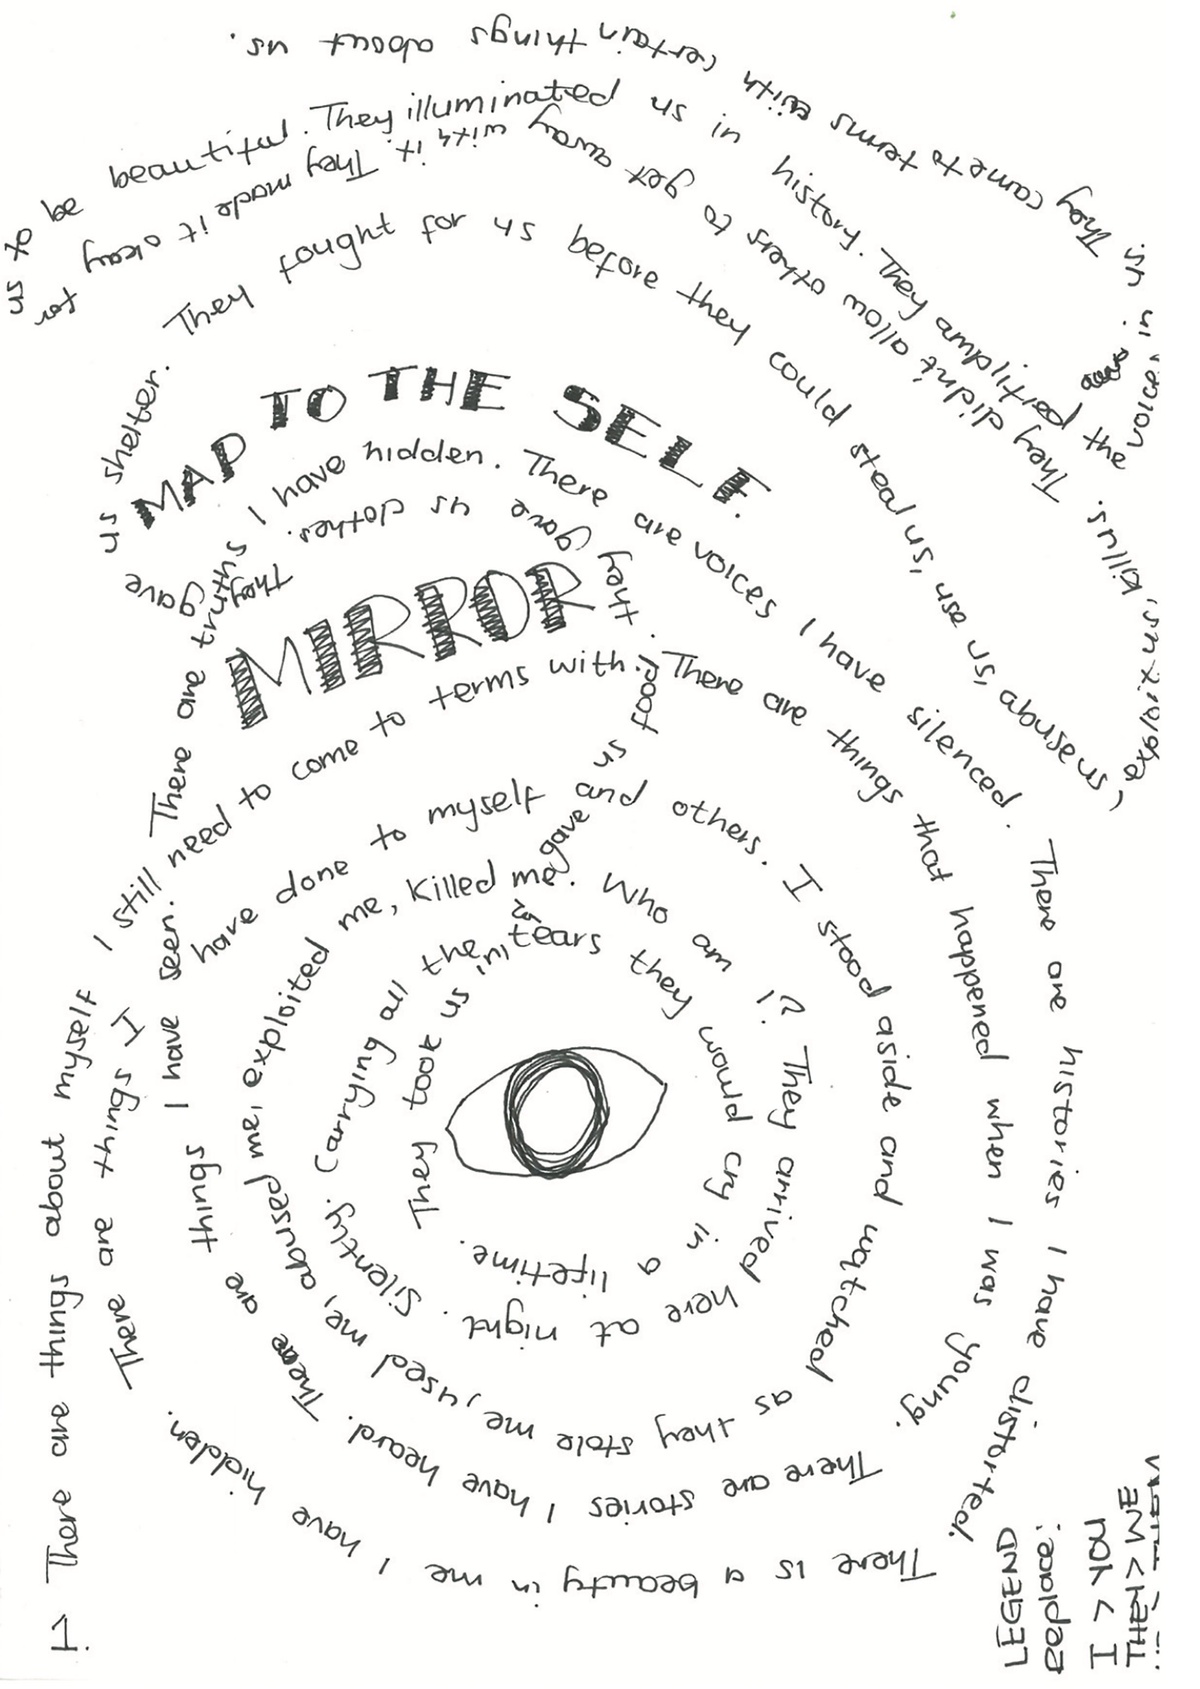 Page from the ‘Ikhonoclast’ zine produced in response to Sir Professor Zanele Muholi’s ‘Ikhono LaseNatali’ exhibition in A4’s Gallery. Felt pen writing circulates across the page around a drawing of an eye, with larger phrases reading ‘mirror’ and ‘map to the self’.
